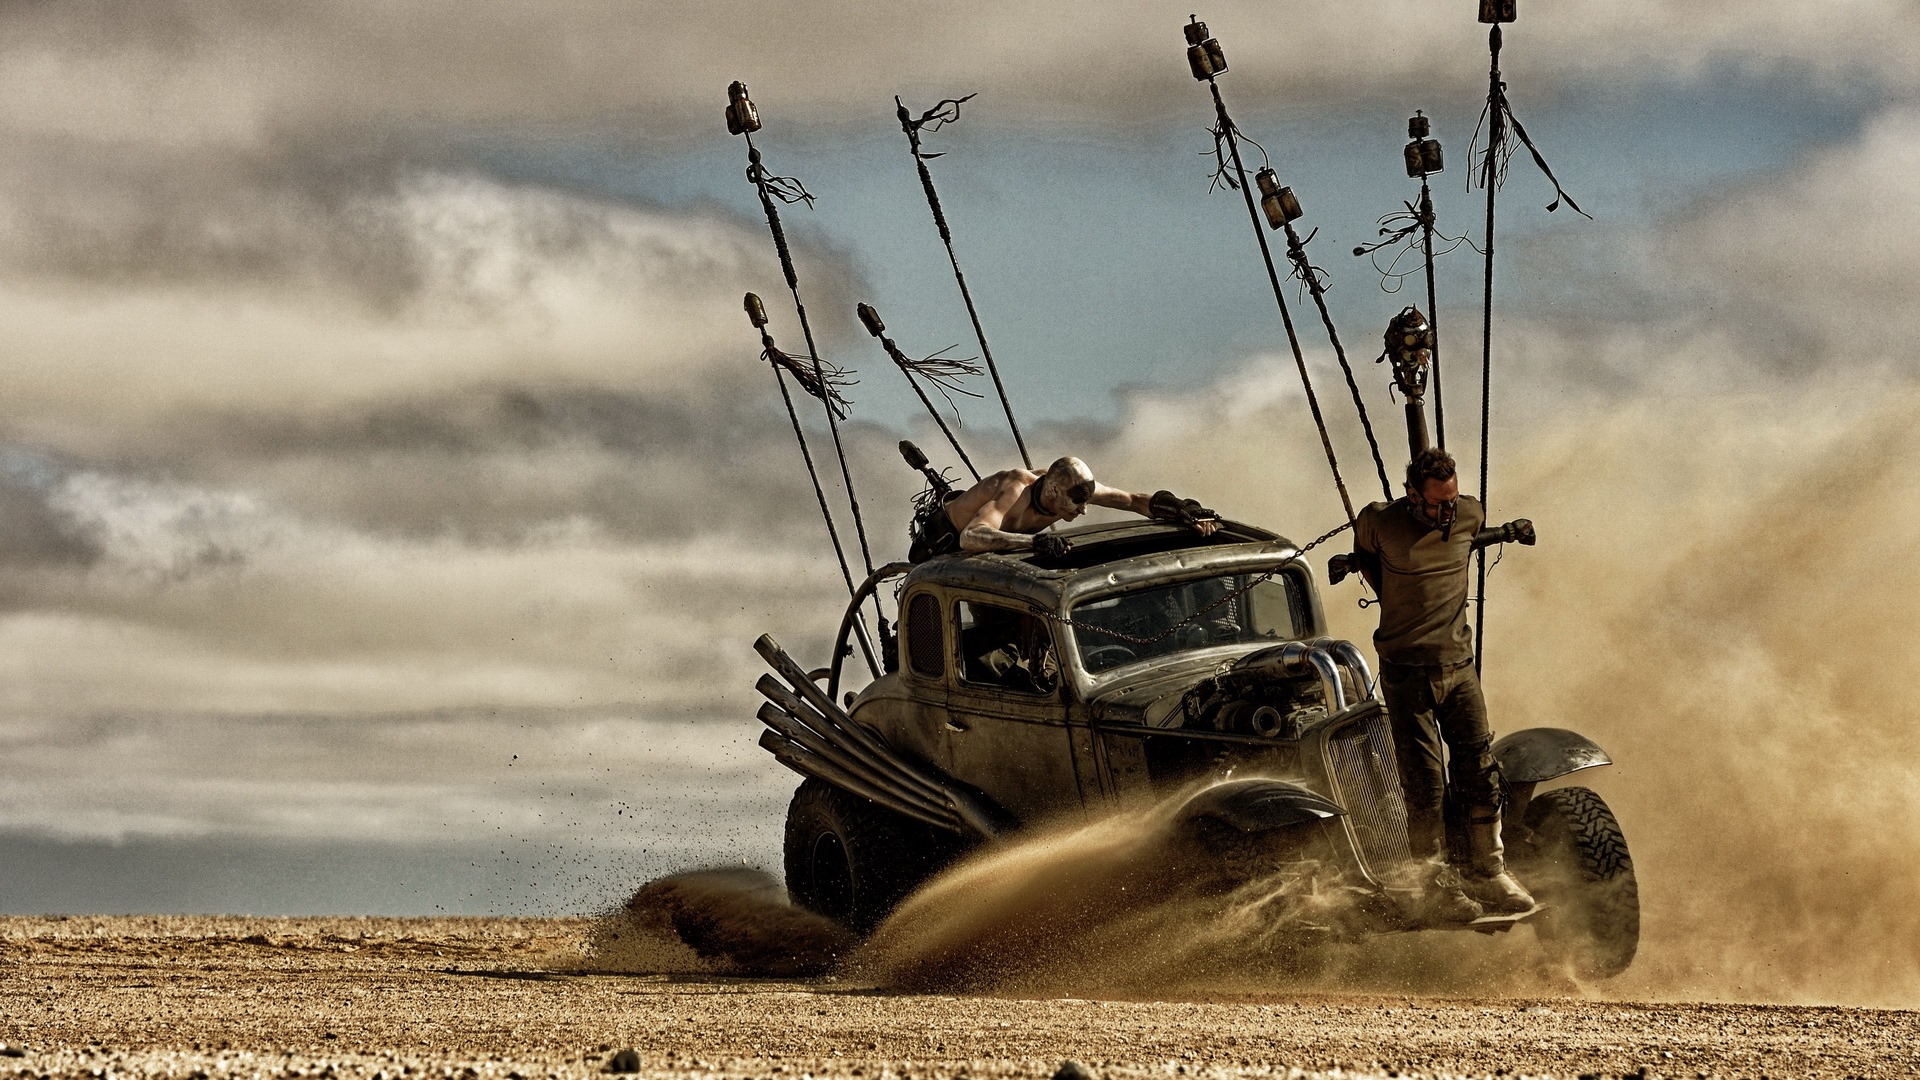 Mad Max: Fury Road, HD movie wallpapers #50 - 1920x1080